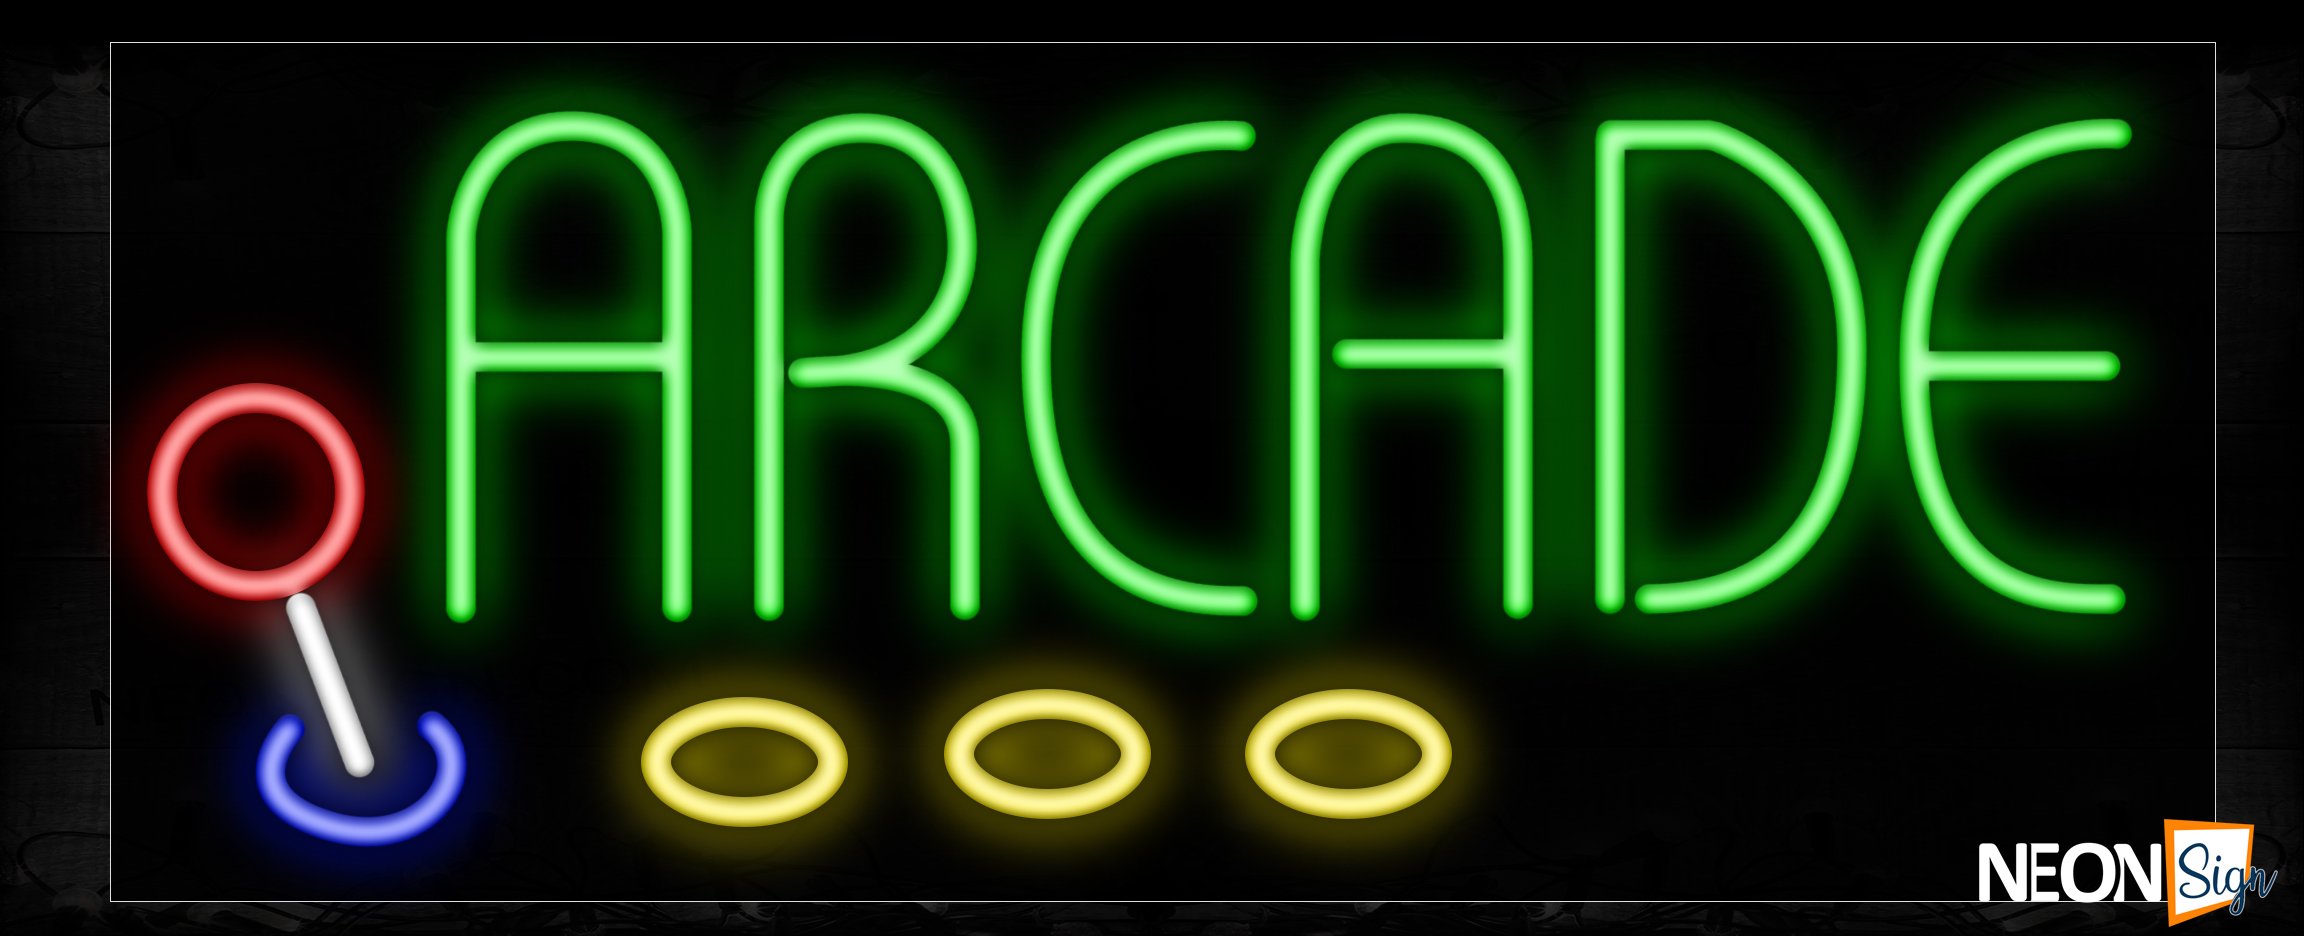 Image of 10730 Arcade with game controller Neon Sign_13x32 Black Backing